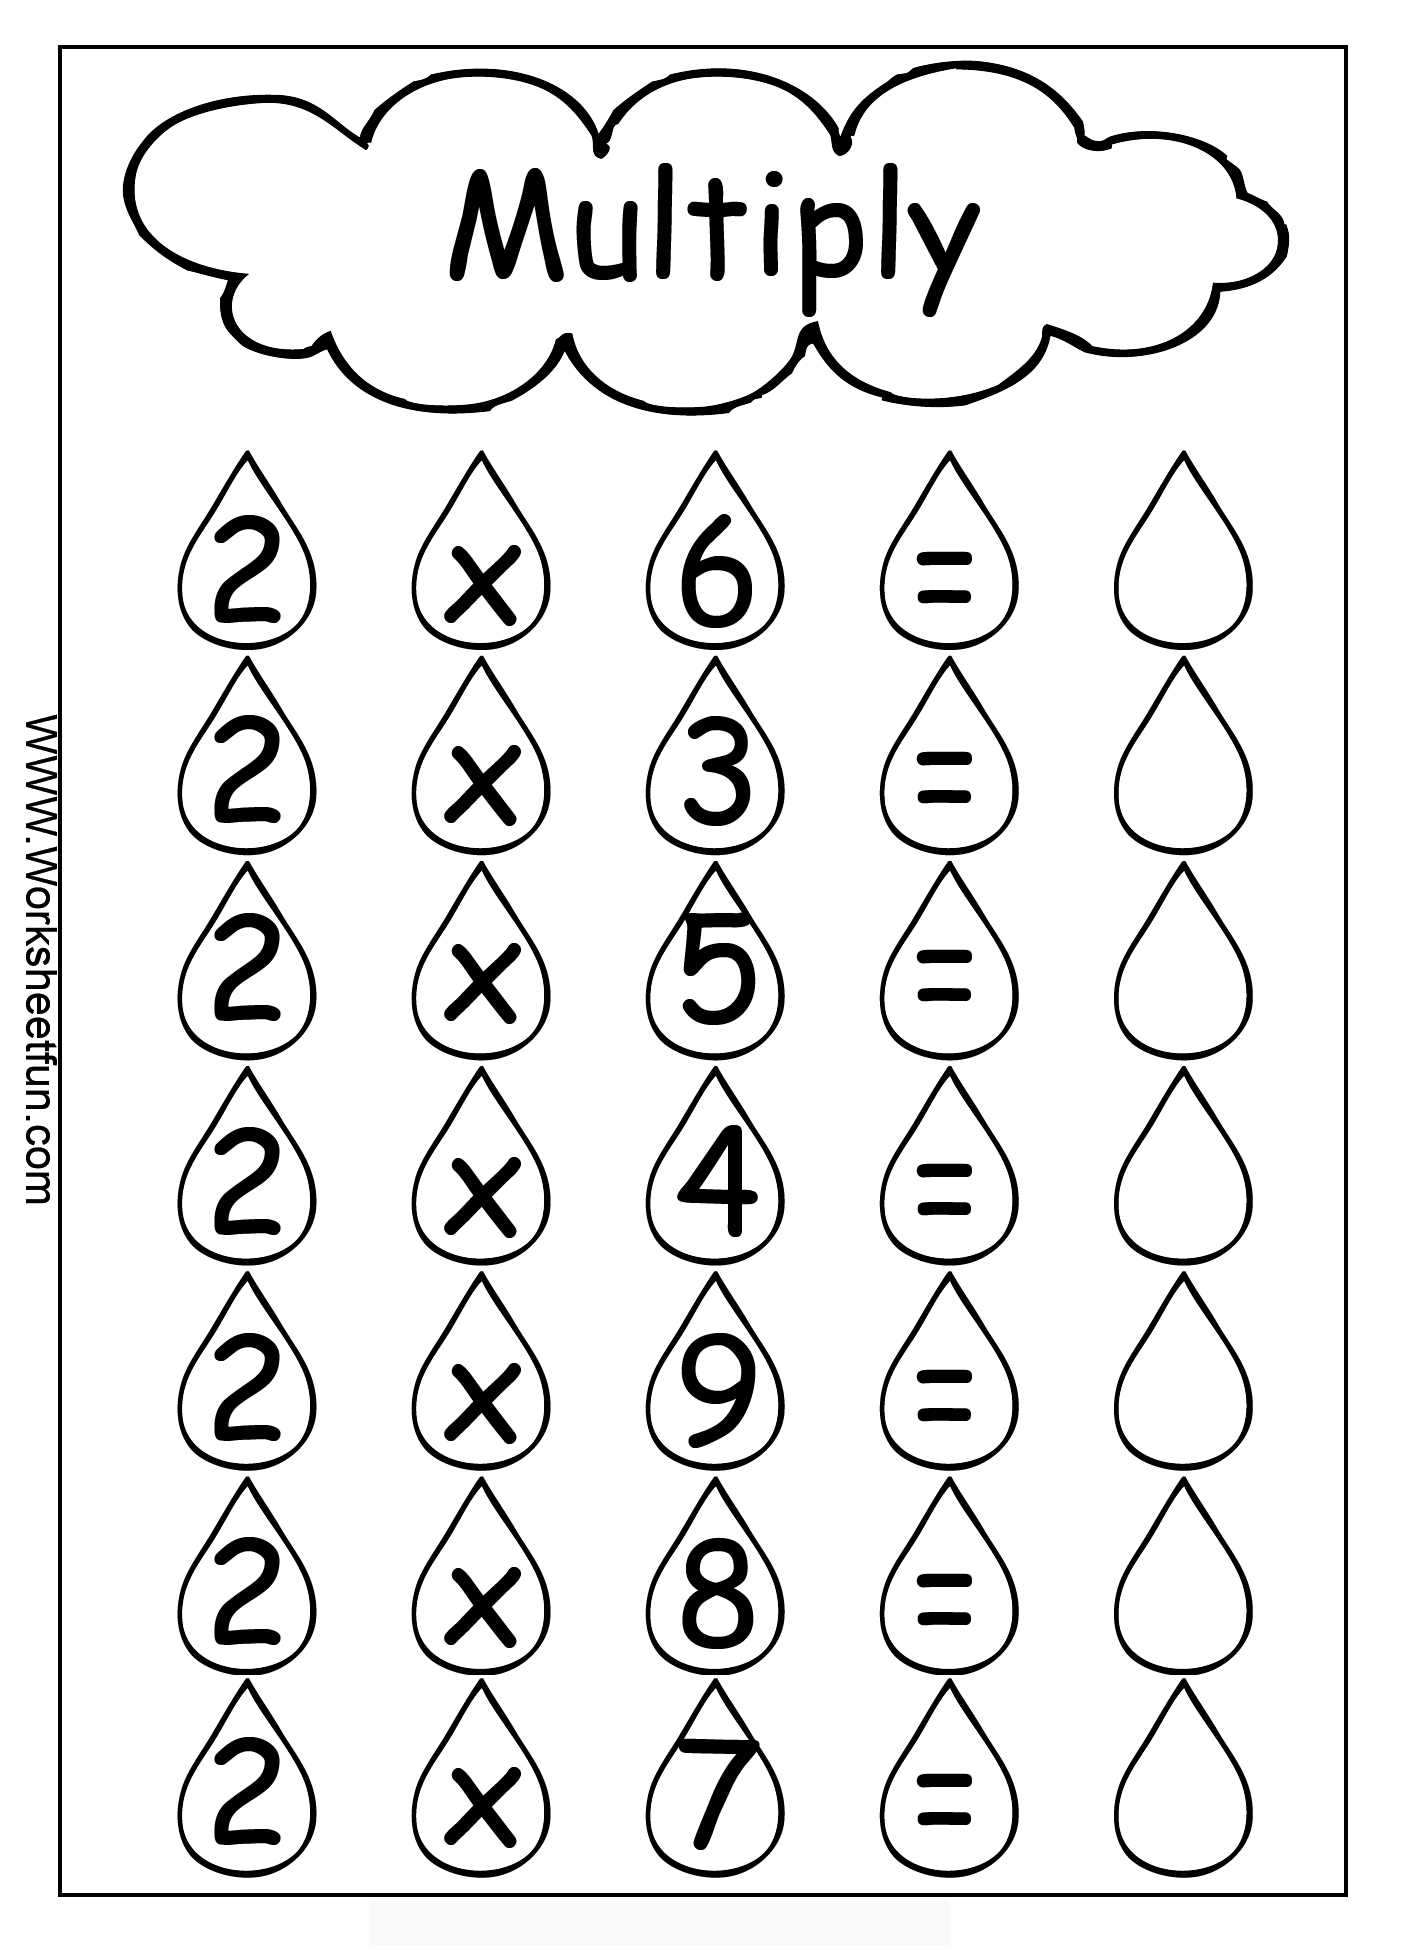 Multiplying Two Digit Numbers Worksheet together with Tables De Multiplication Liens Dix Mois